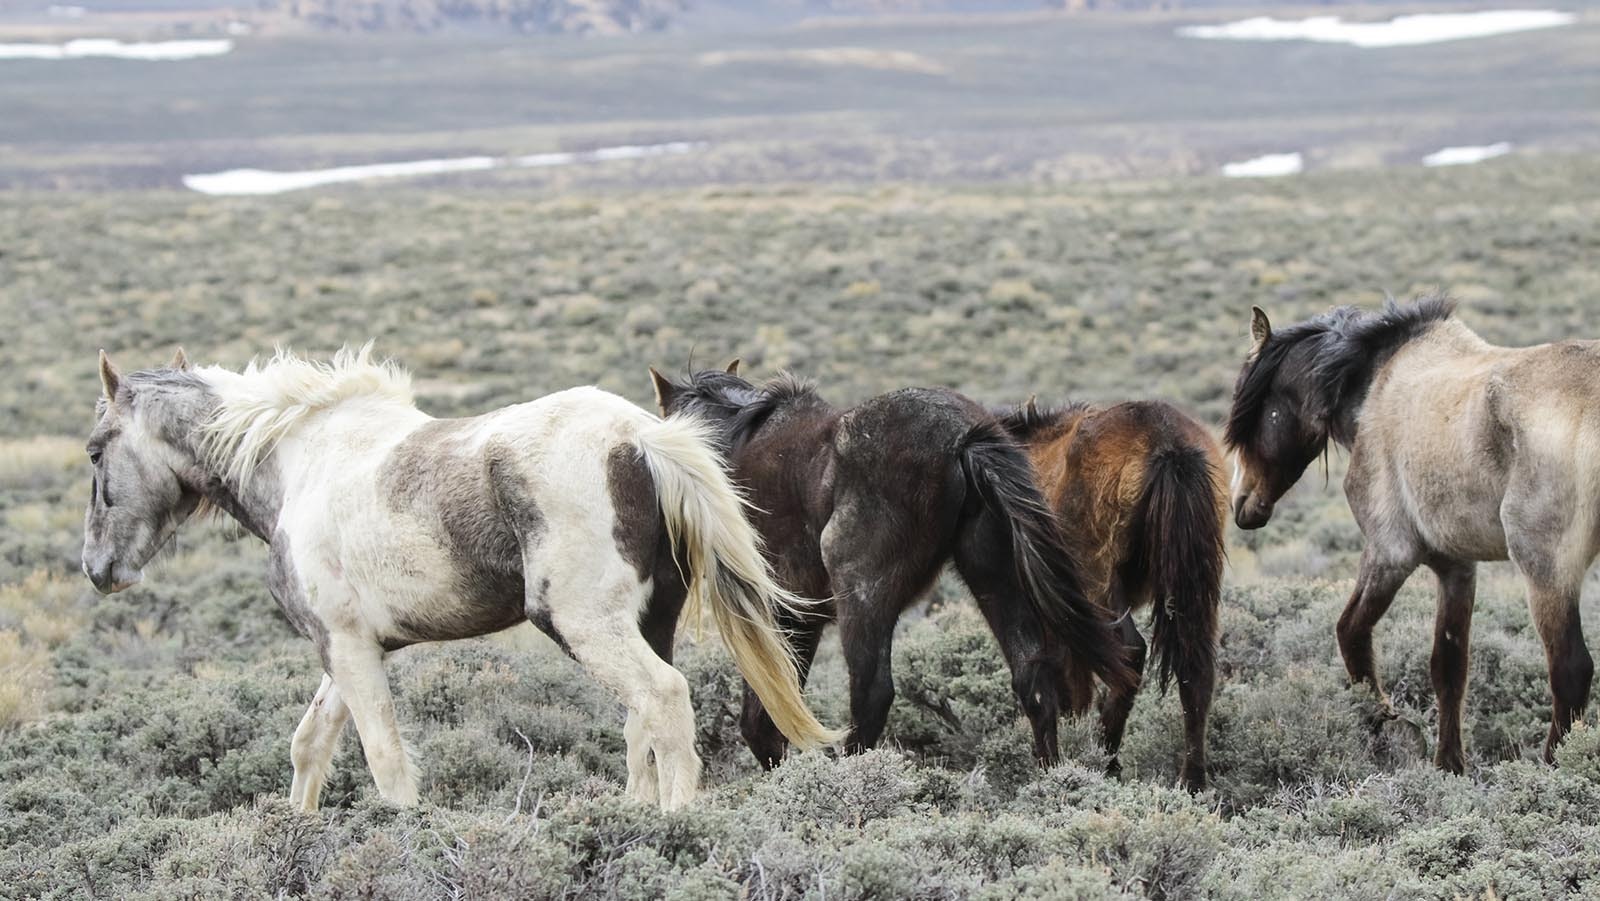 Though some of Wyoming’s mustangs pulled through the winter, wild horse advocates say the Bureau of Land Management overestimated its population. The agency is double-checking its numbers, a spokesman said.